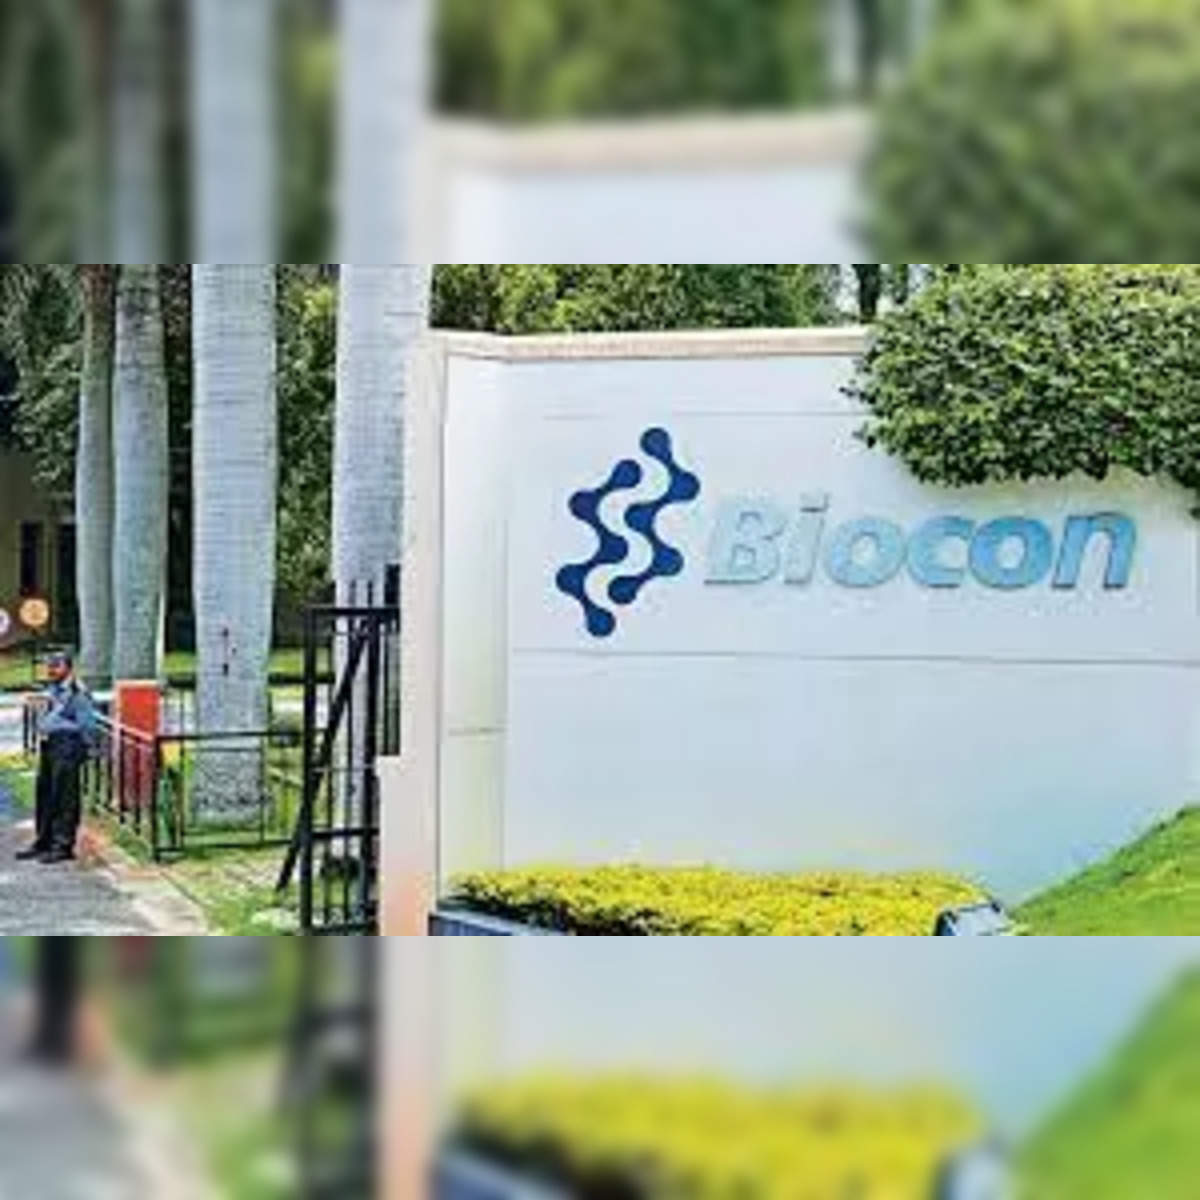 [LIVE] Biocon Share Price | 52 Week High/Low Stocks | Stock History, Futures & Options Quote